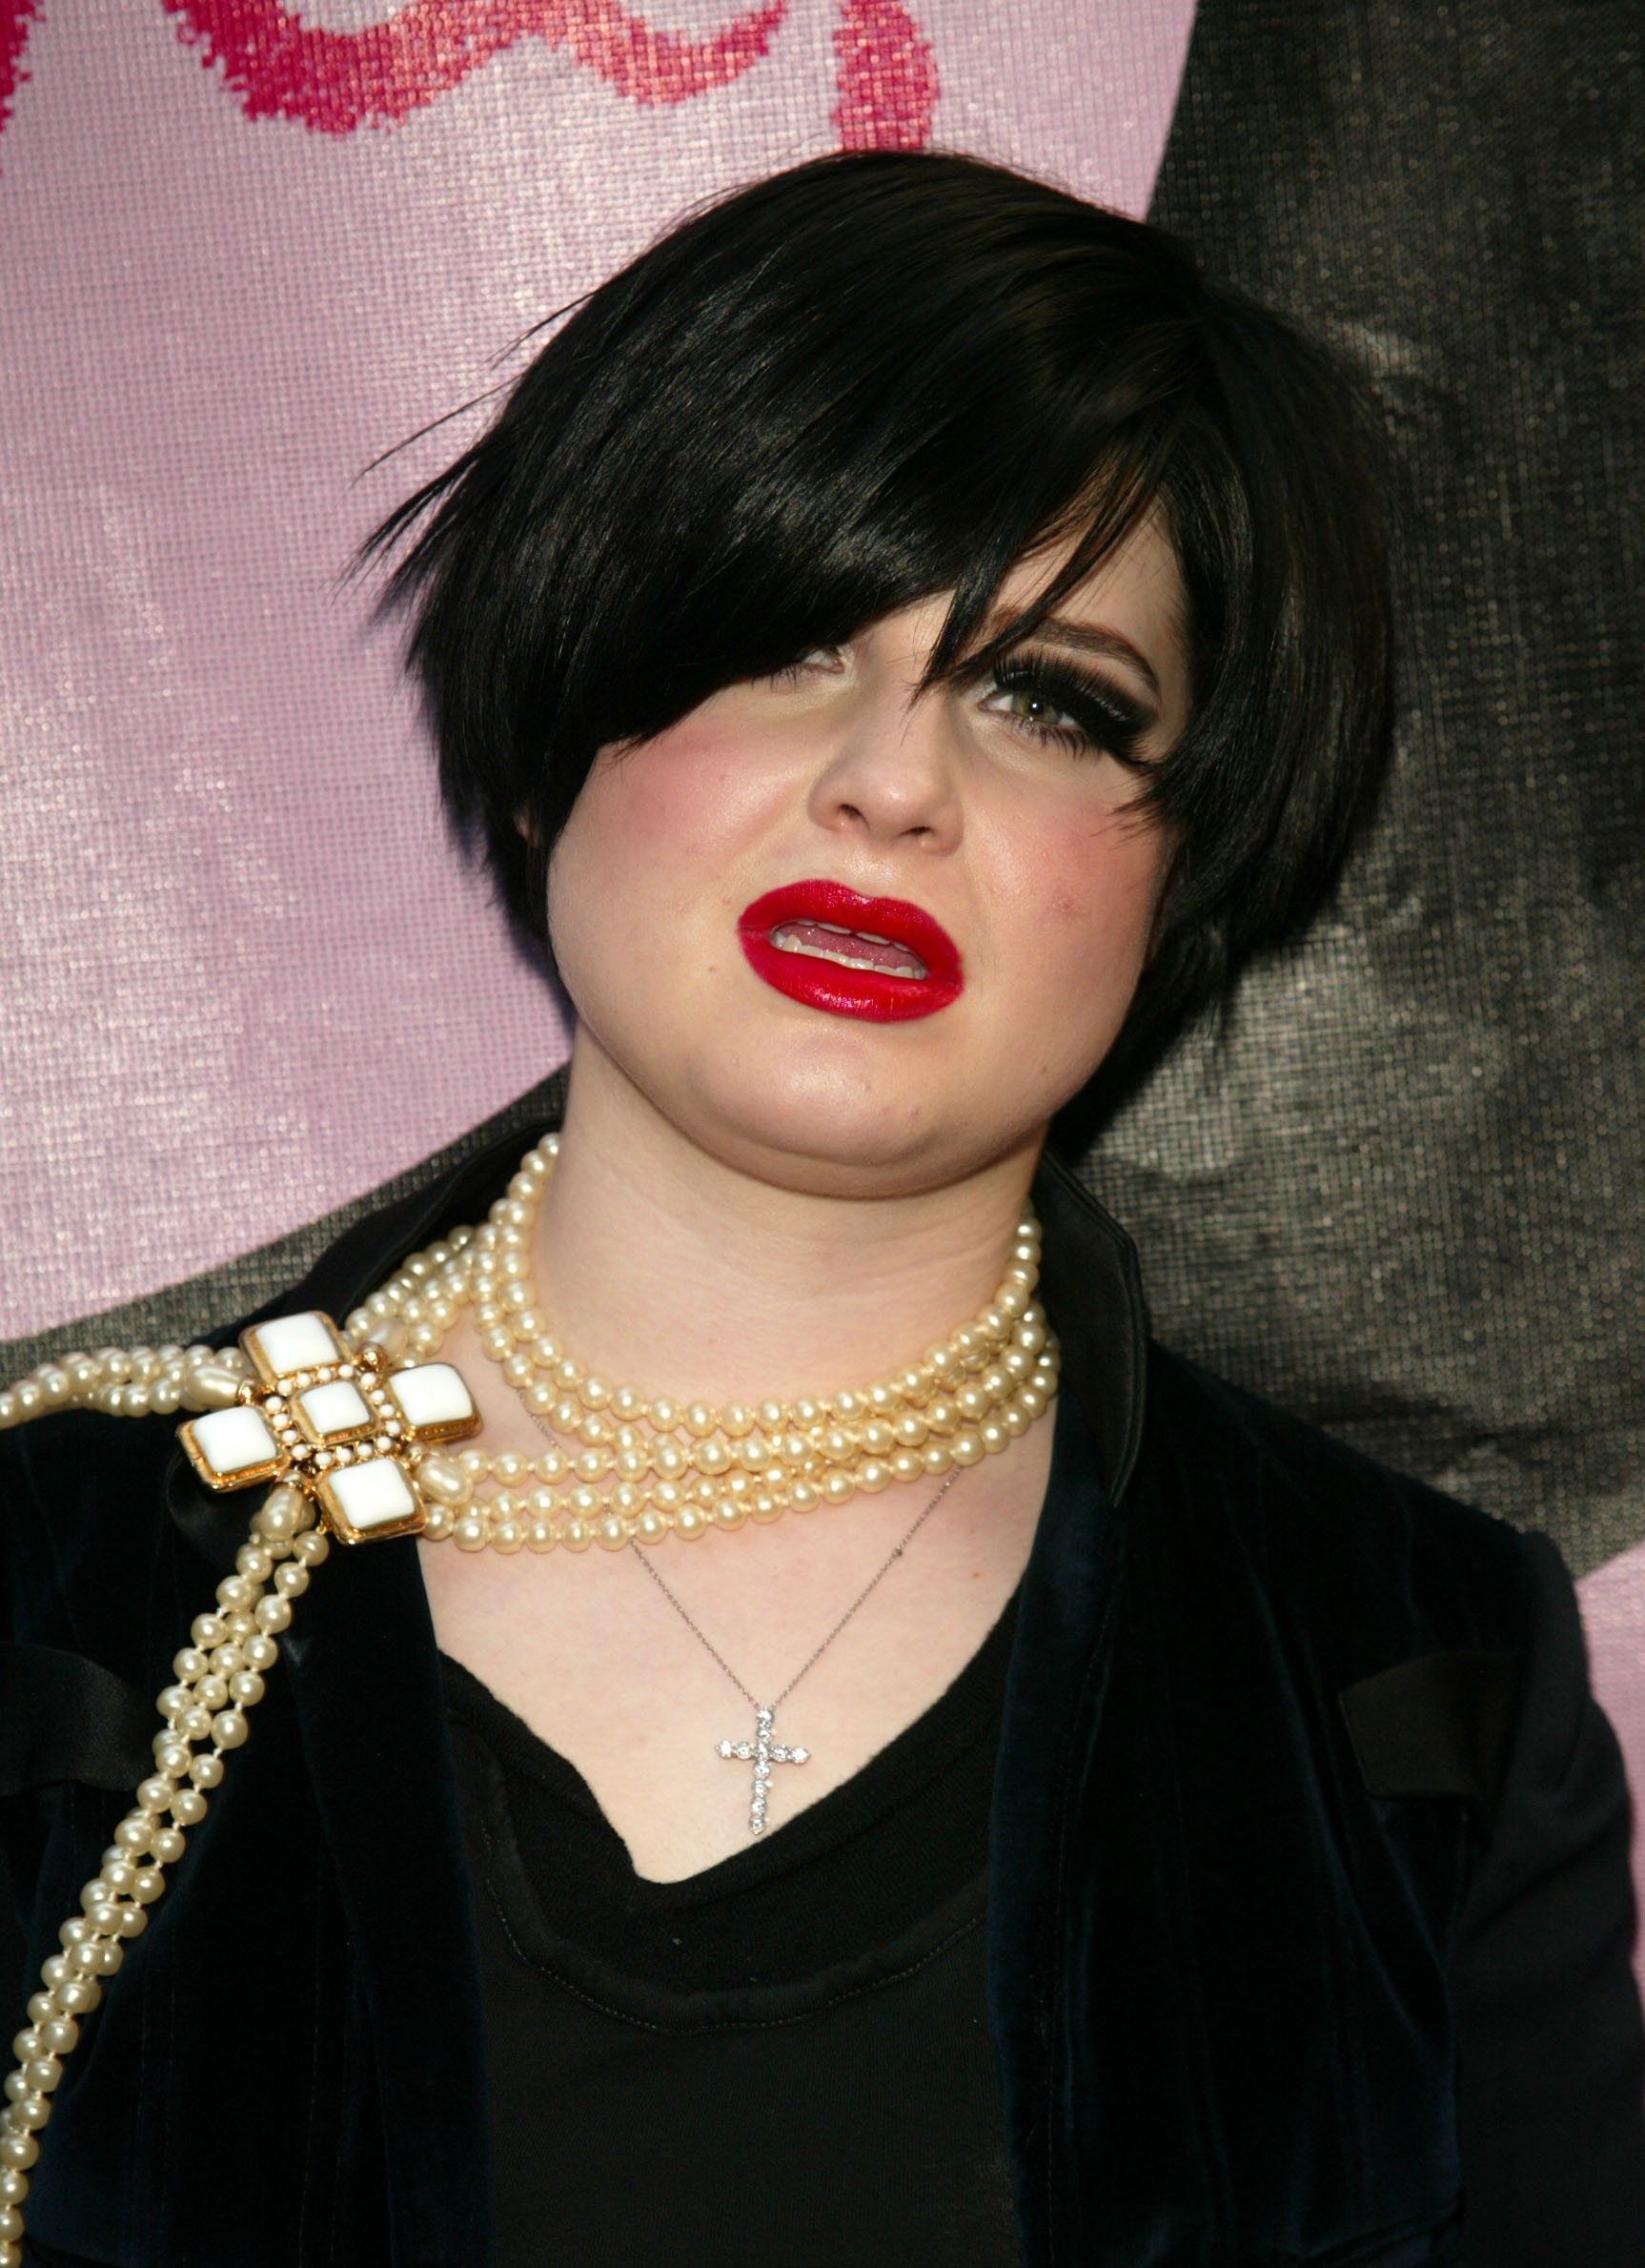 Kelly Osbourne arriving at the CosmoGirl August issue launch party to honor her first solo magazine cover at Cherry at W-Tuscany, in New York City, on July 15, 2002. | Source: Getty Images